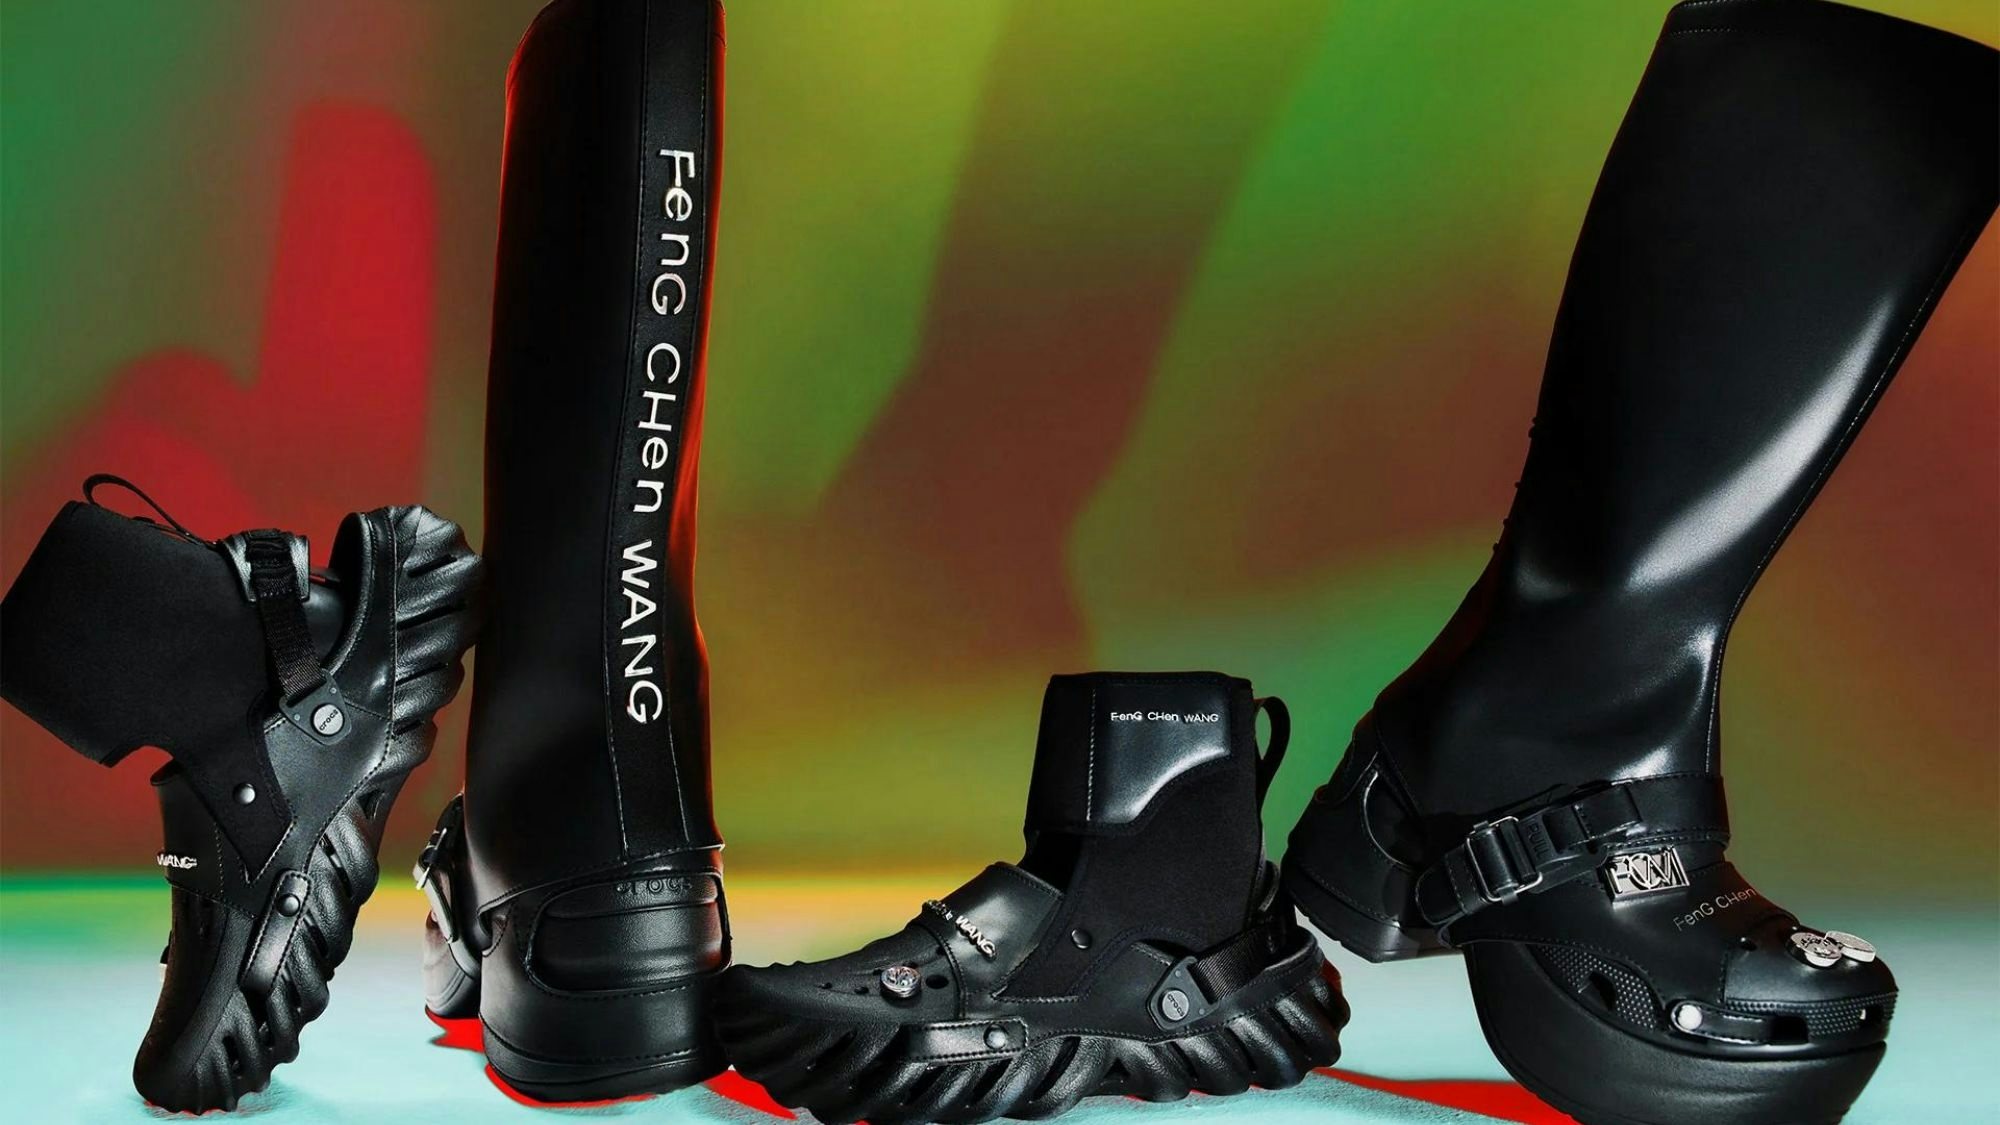 Global names are increasingly connecting to Chinese consumers via designers such as Feng Chen Wang. Photo: Feng Chen Wang x Crocs